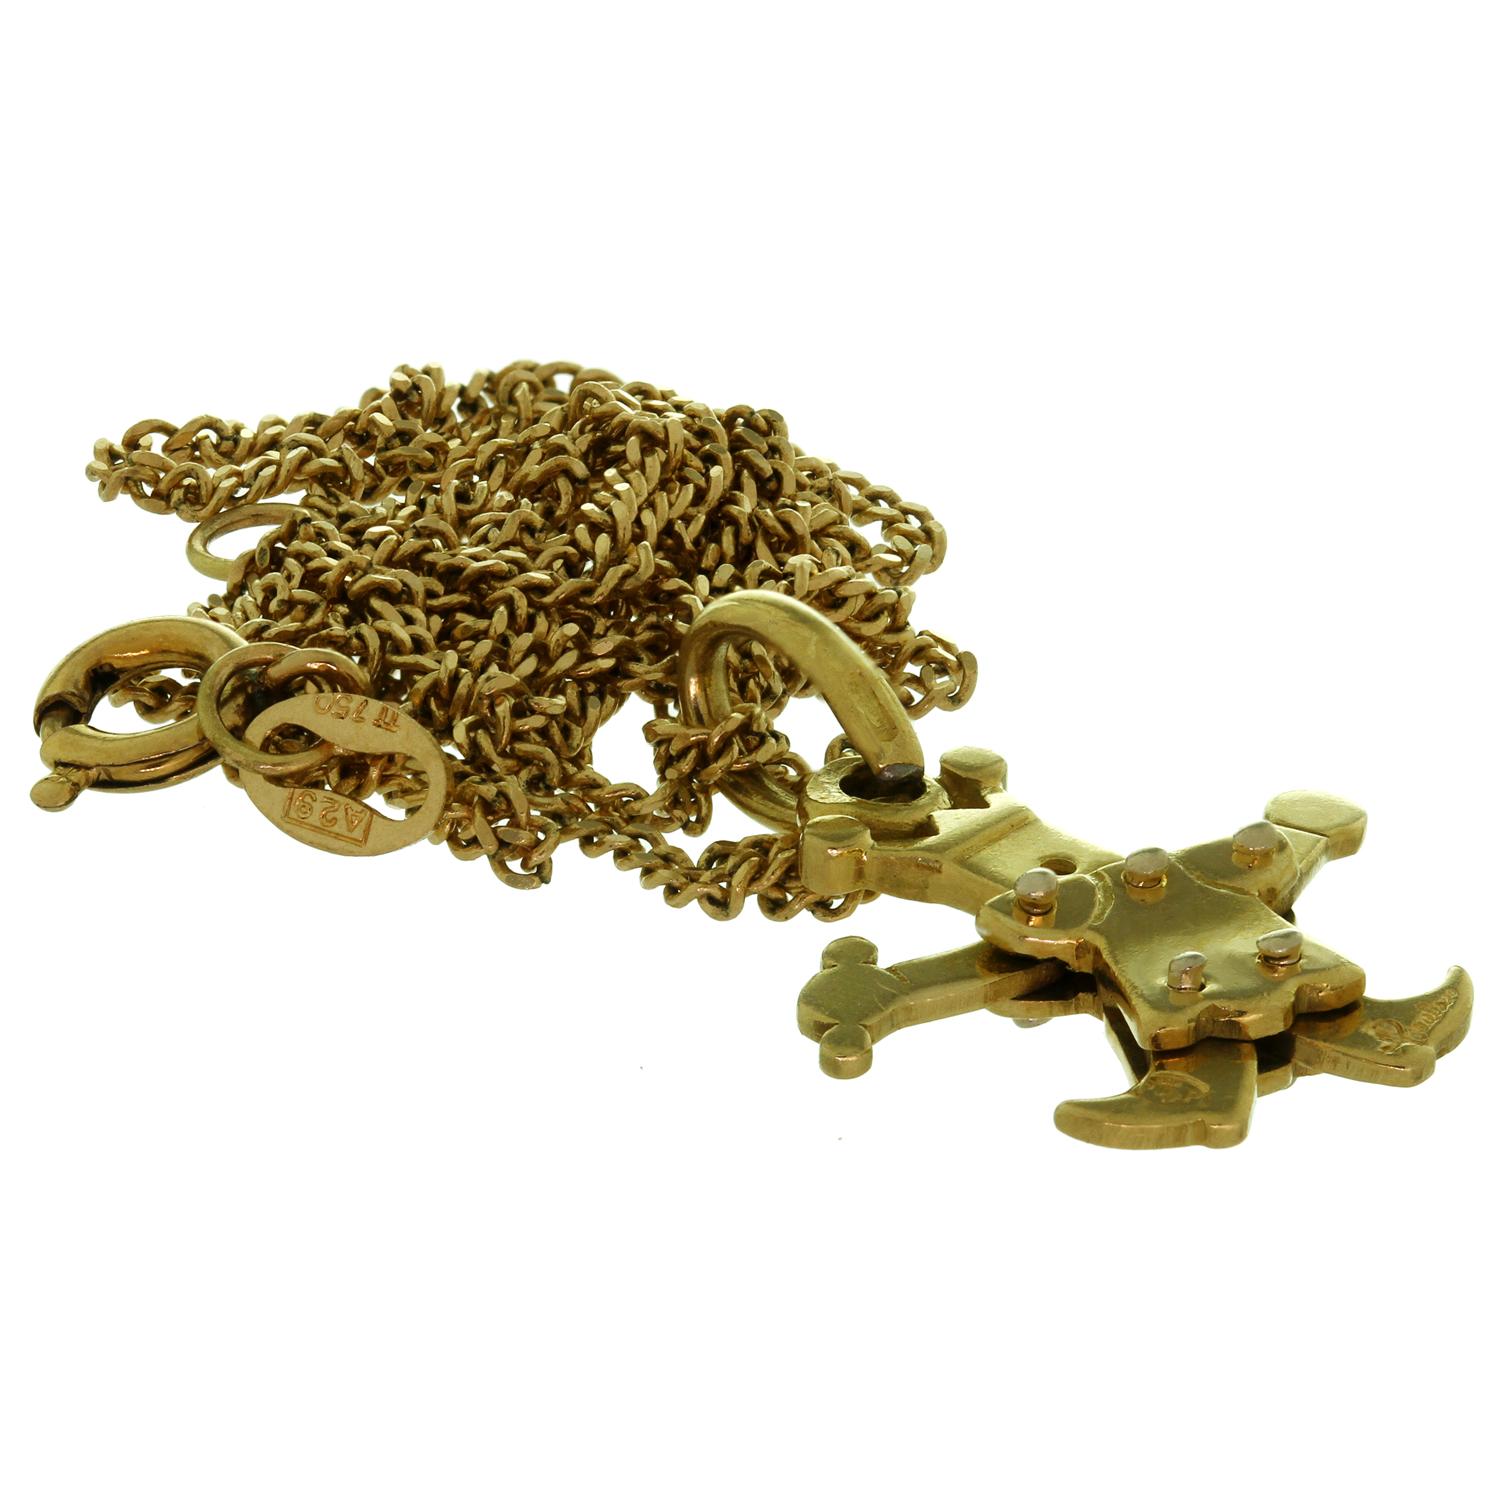 This fabulous necklace features a Pomellato figure pendant with movable arms and legs crafted in 18k yellow gold. Made in Italy circa 2000s. Measurements: 0.66